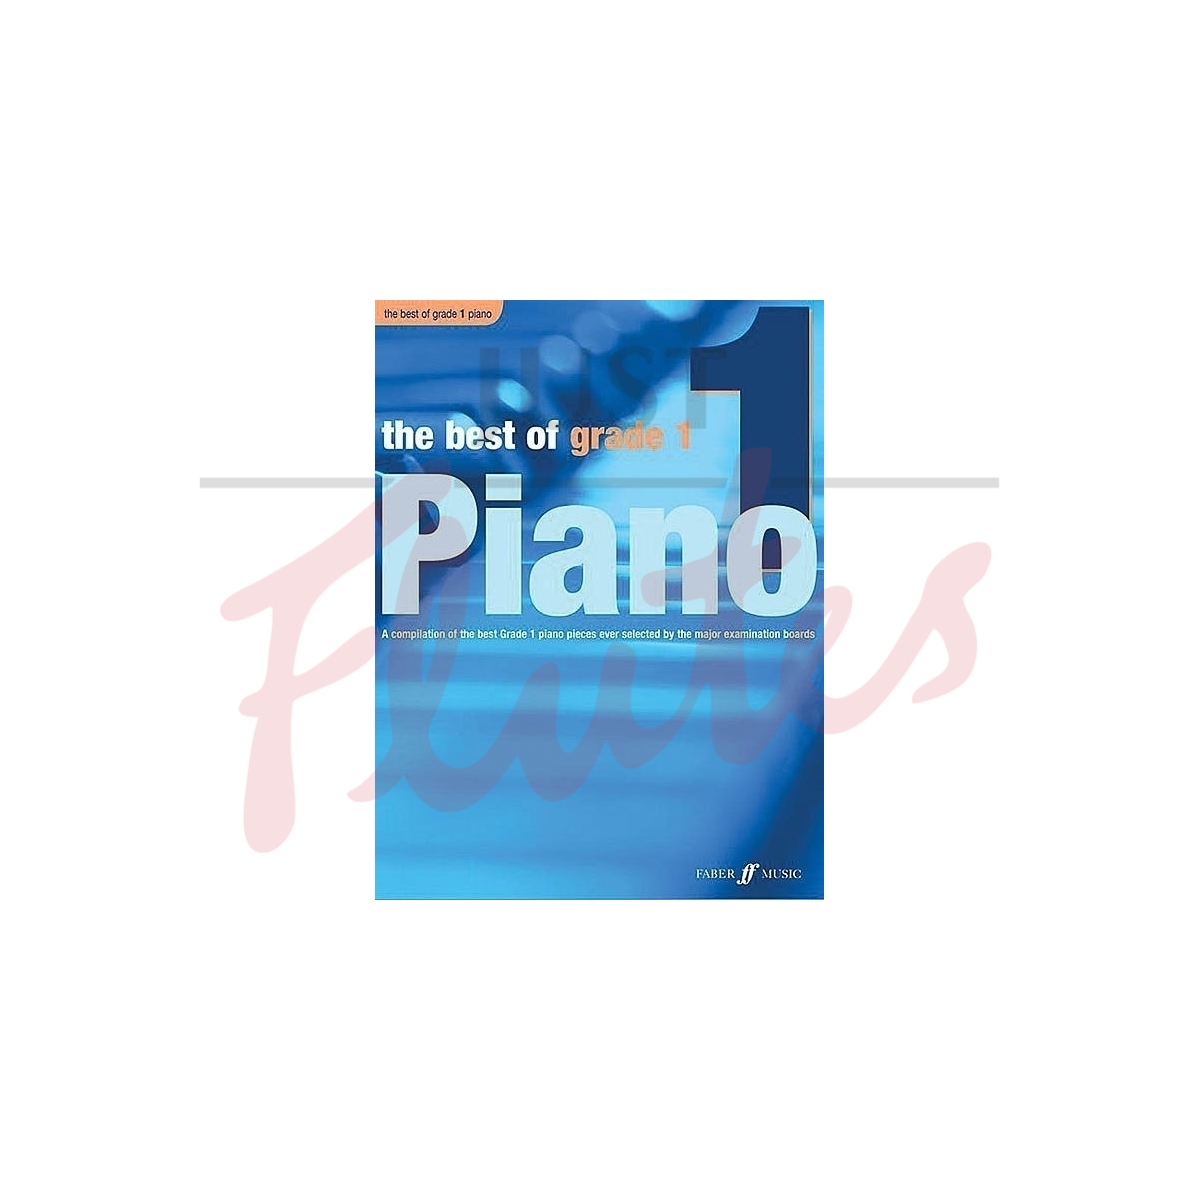 The Best of Grade 1 Piano